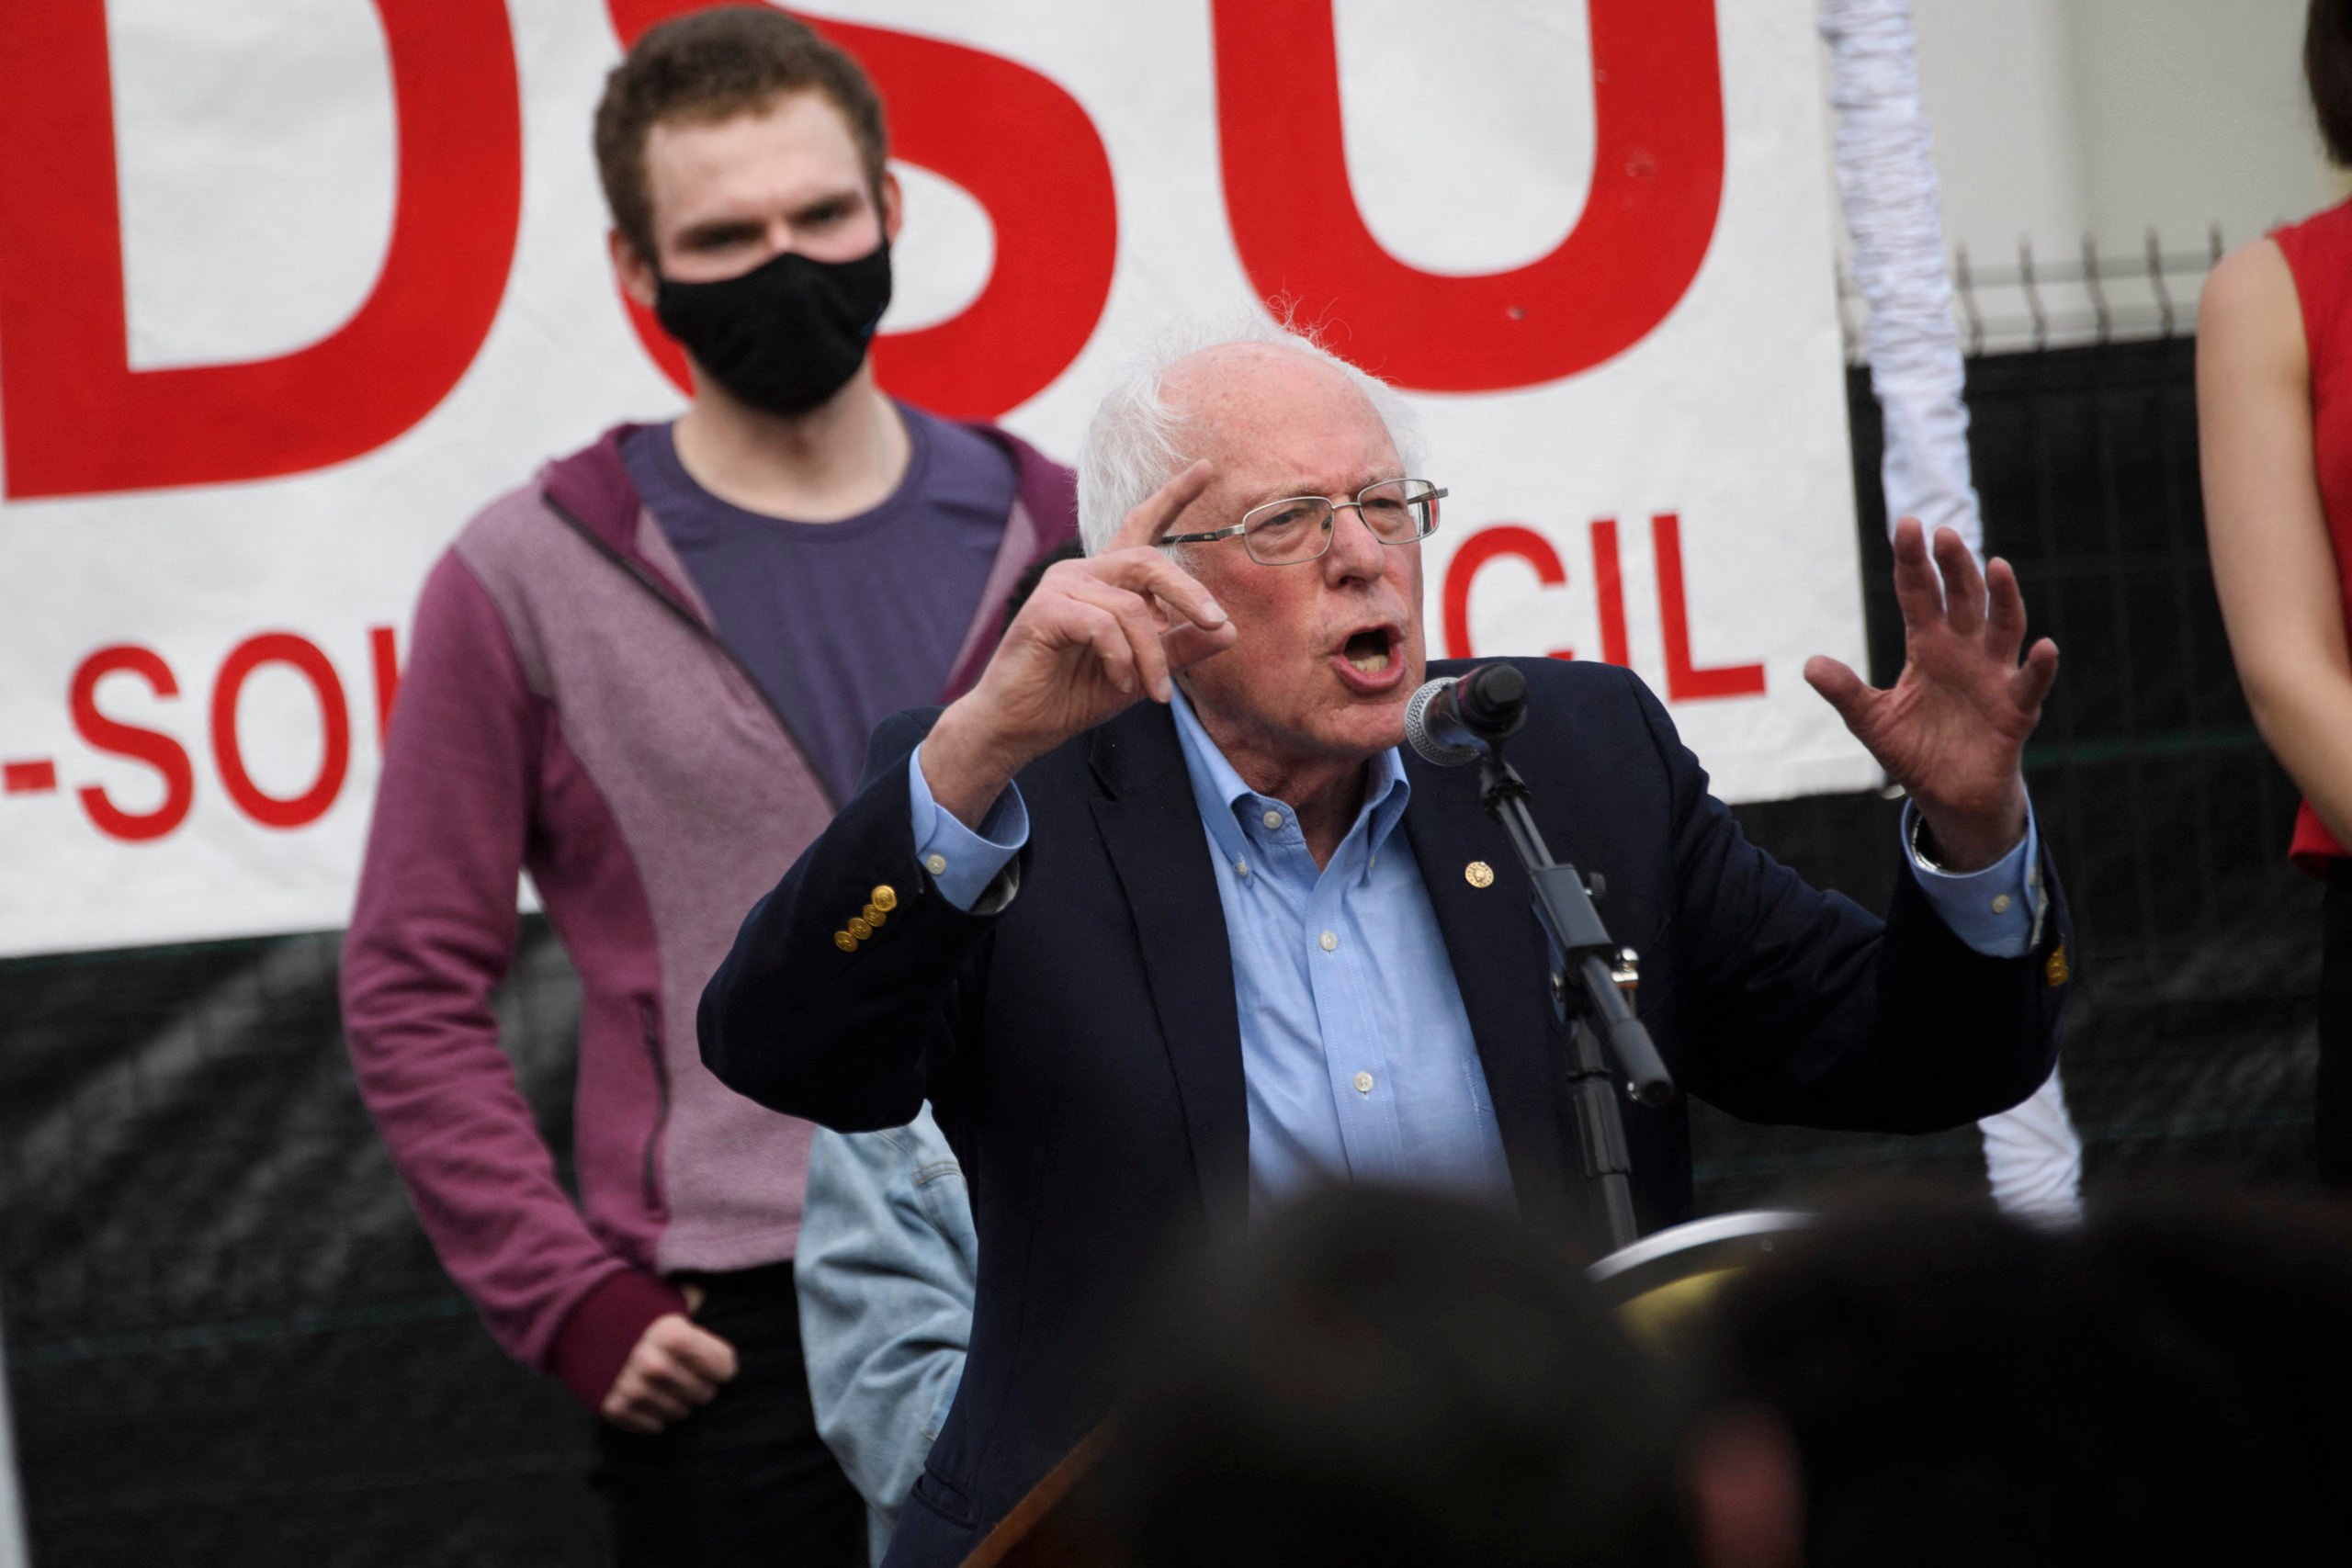 Sen. Bernie Sanders speaks in support of the unionization of Amazon workers in Alabama on March 26. (Patrick T. Fallon/AFP via Getty Images)